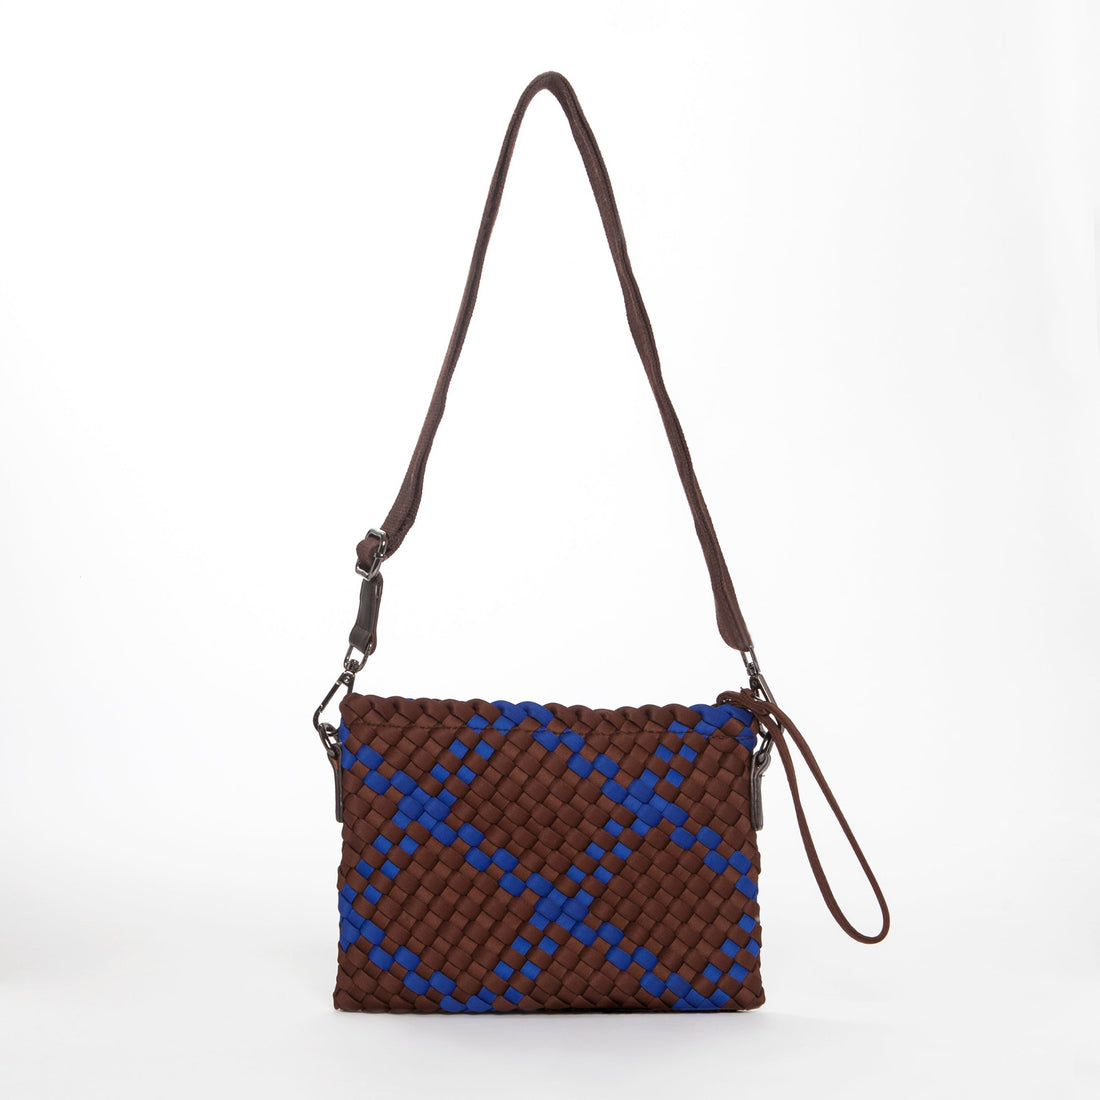 Andreina Bags Brown Blue Sol Crossbody Bag. Perfect to carry essentials. And great for wearing across your body and go. The back to go! So convenient and stylish. Designed in Australia. Brown Blue Crossbody bag. 